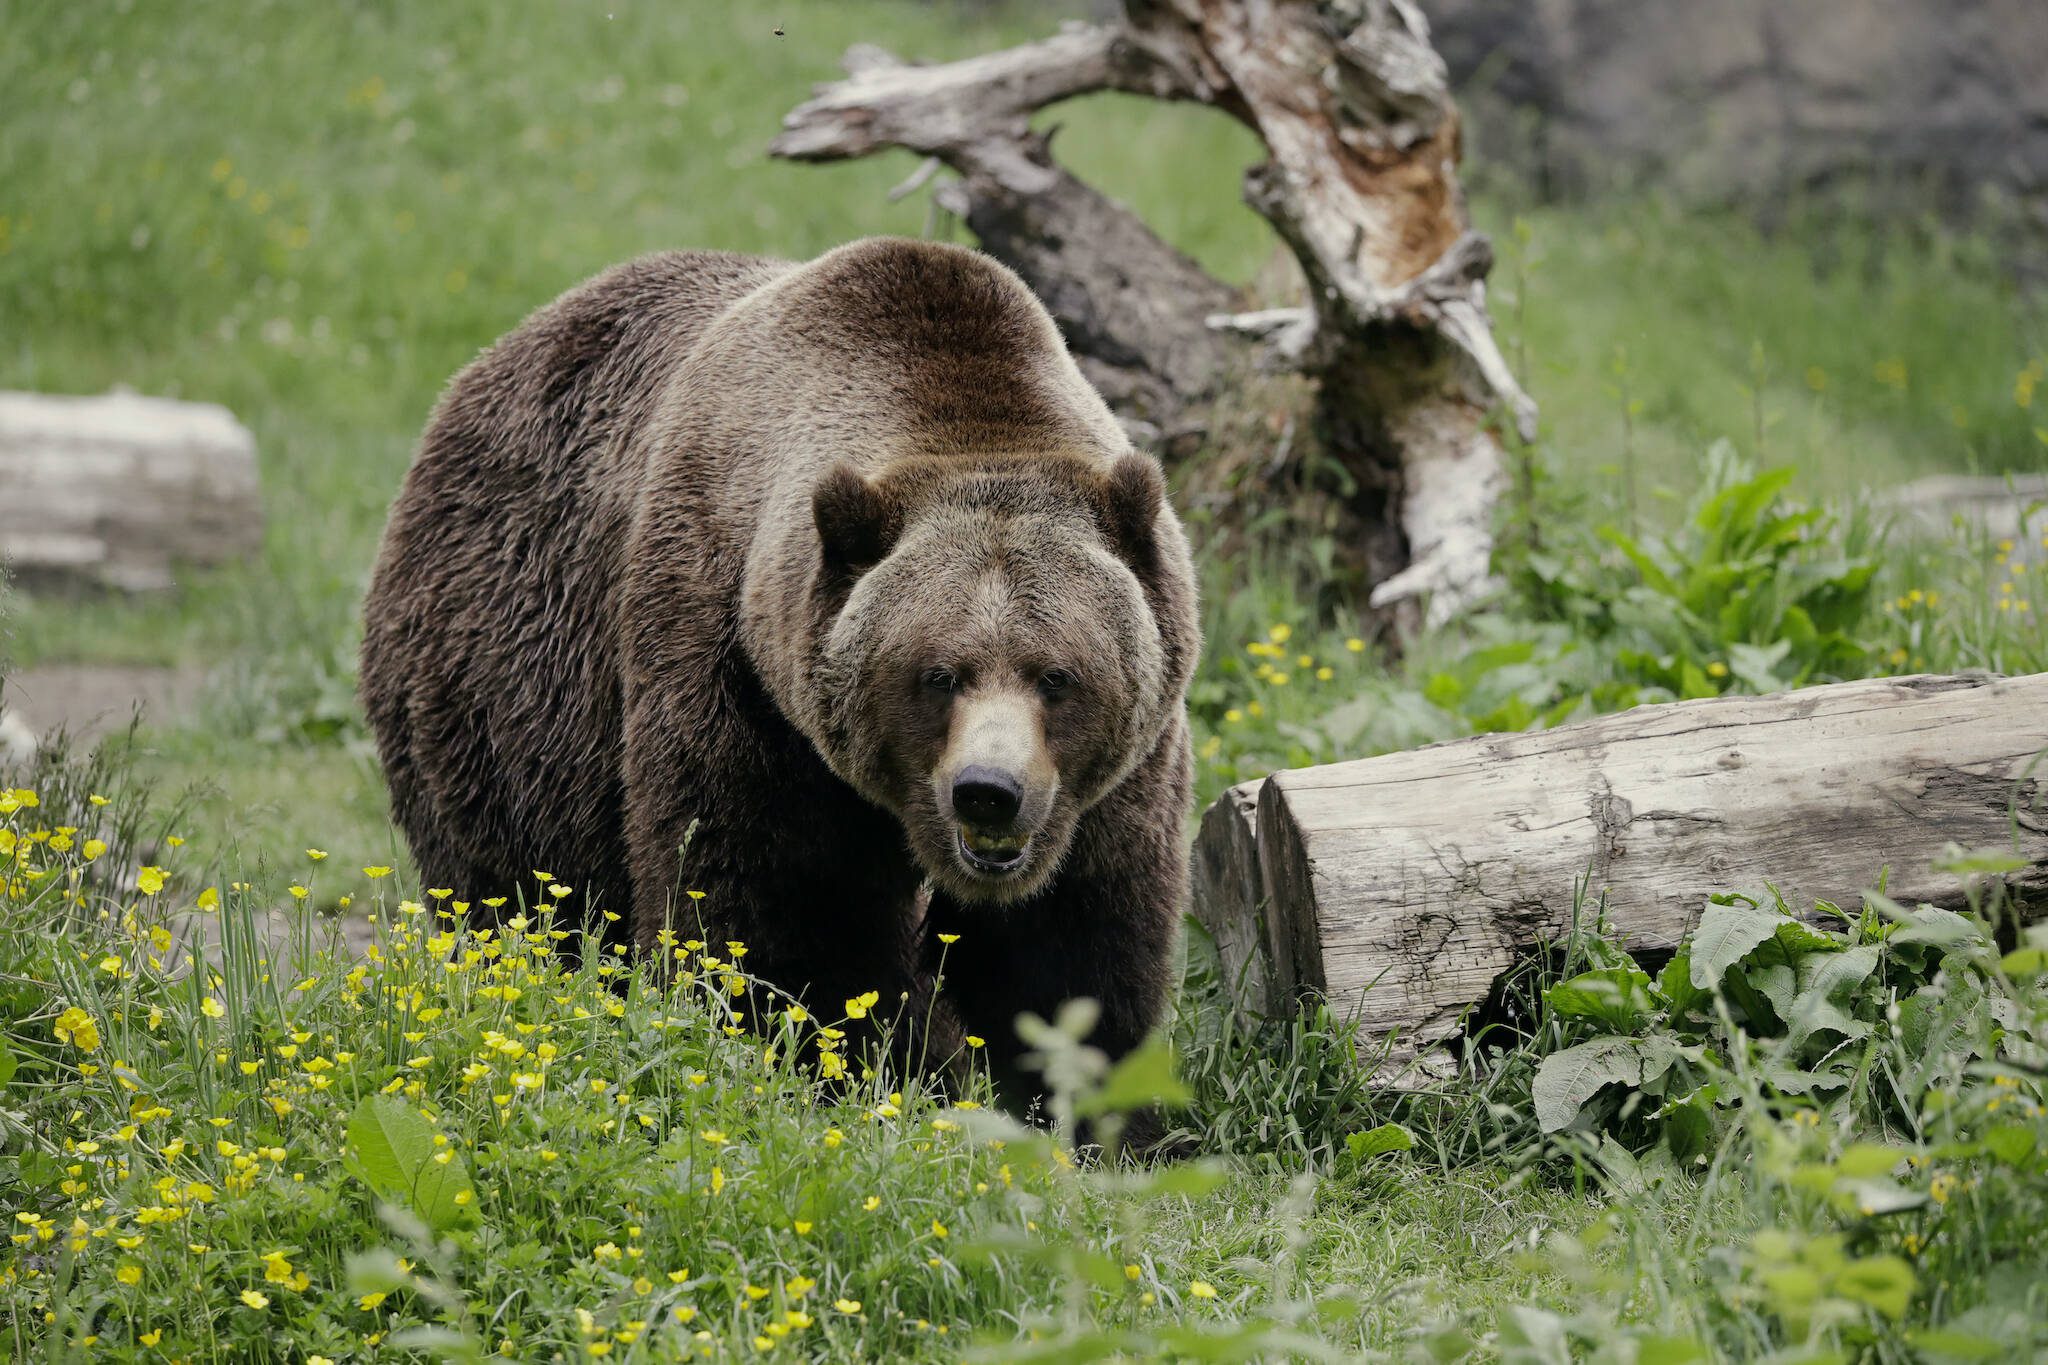 A grizzly bear roams an exhibit at the Woodland Park Zoo May 26, 2020. Grizzly bears once roamed the rugged landscape of the North Cascades in Washington state but few have been sighted in recent decades. (AP Photo/Elaine Thompson, File)